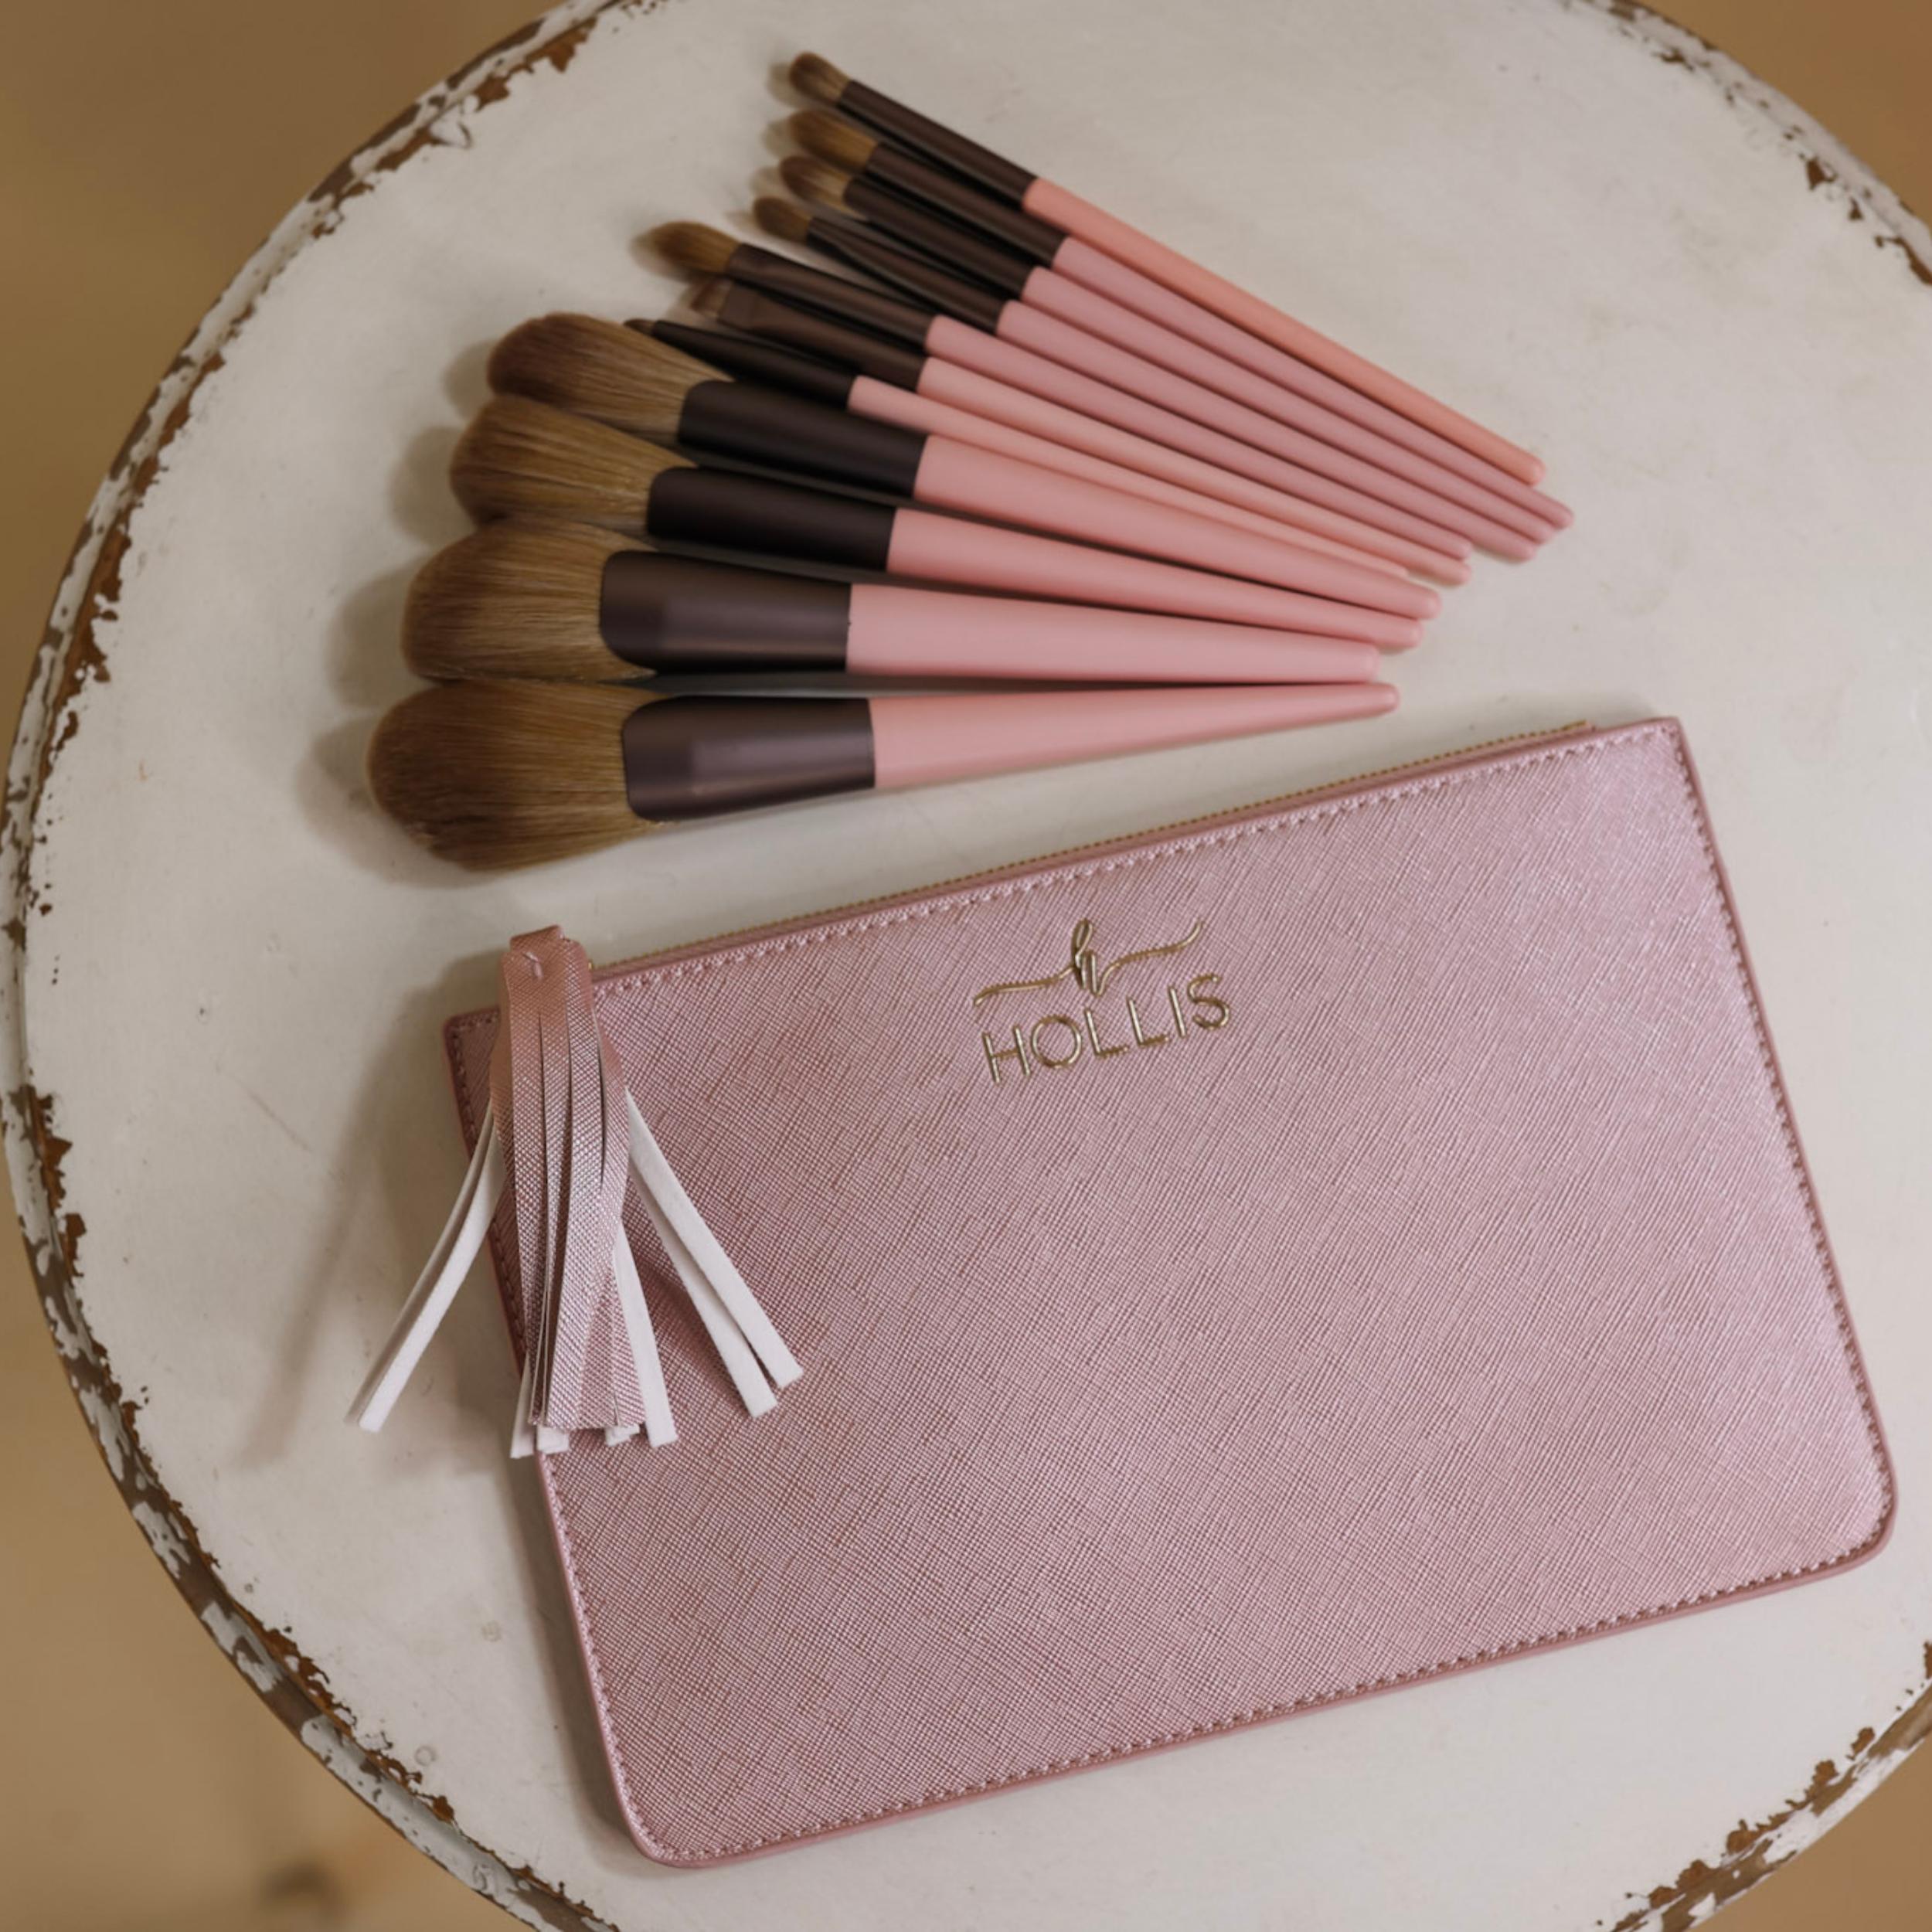 The 11 Best Blush Brushes of 2023